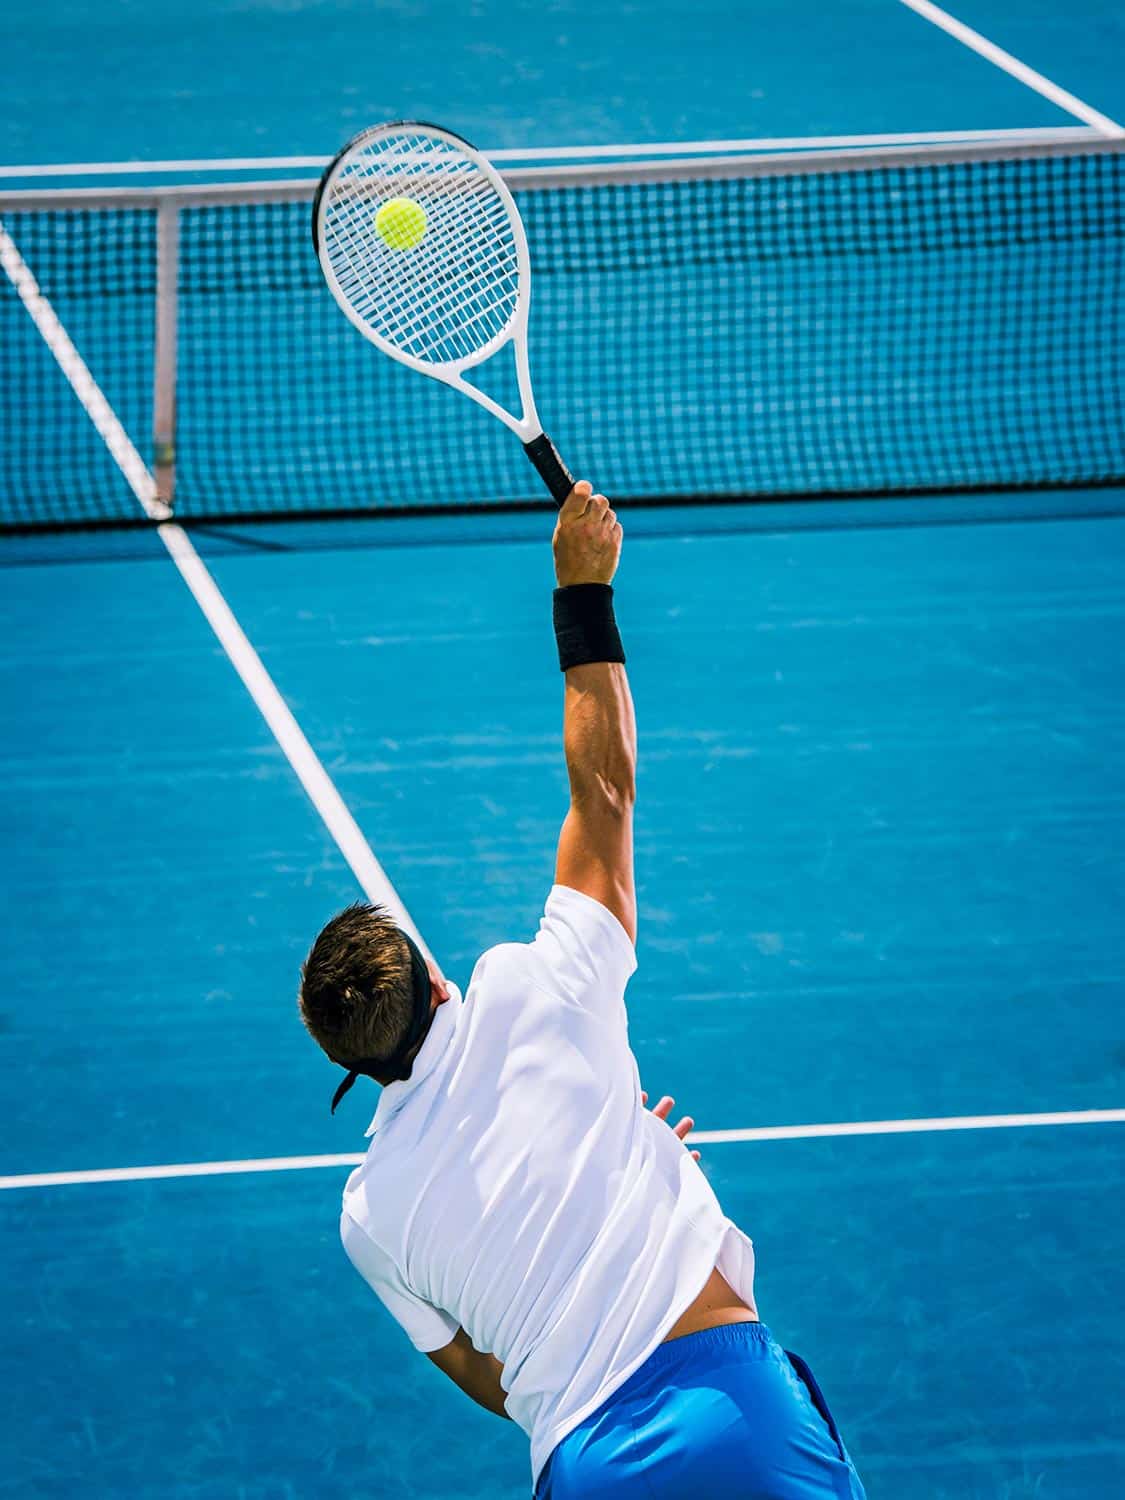 Professional tennis player serving on a blue tennis court